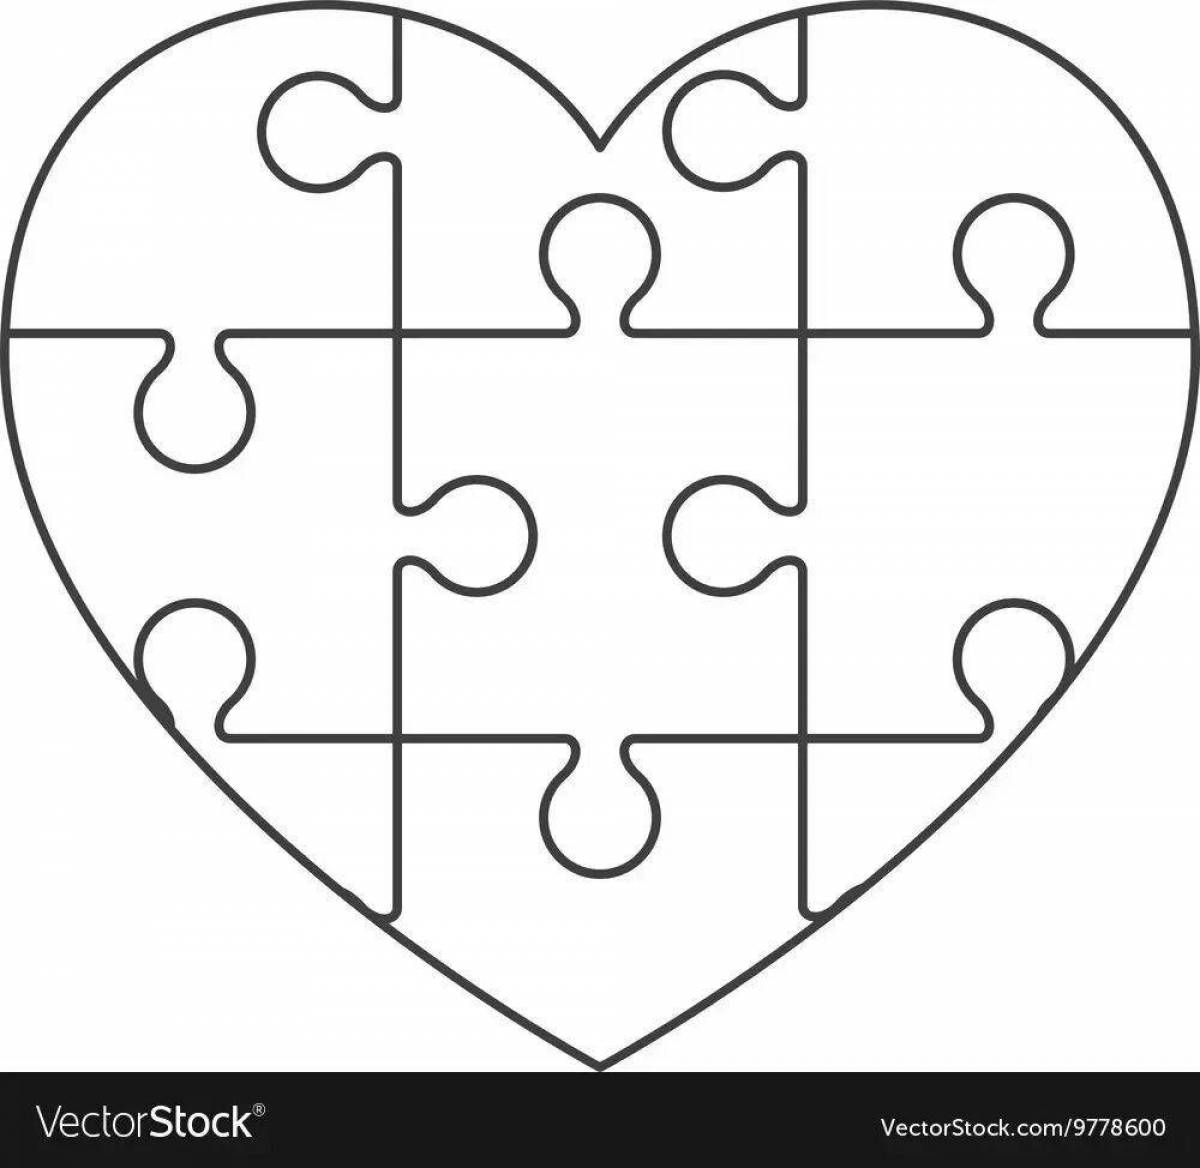 Coloring fairy heart puzzle